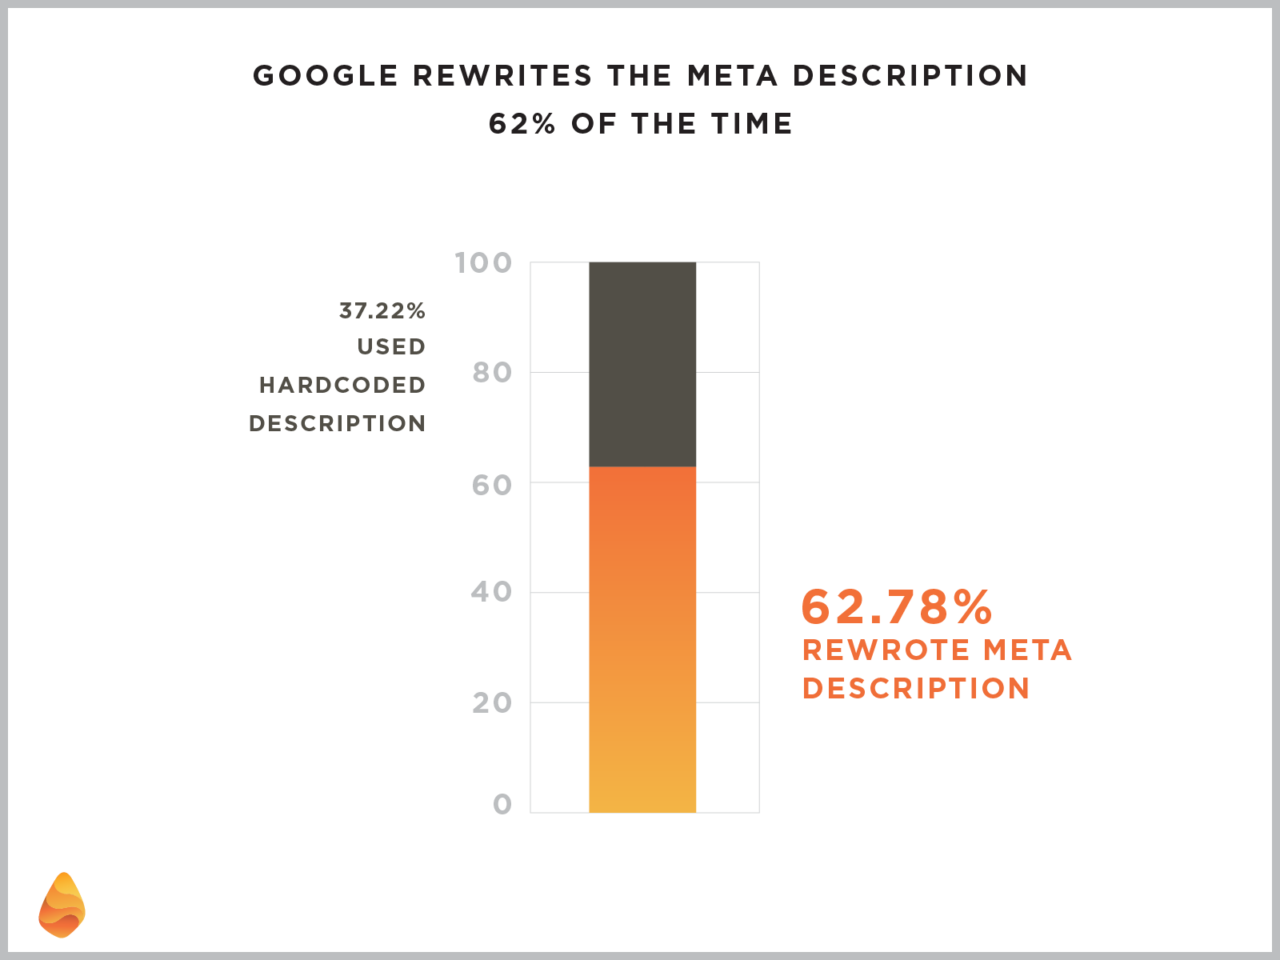 Graph showing that Google rewrites meta descriptions 62% of the time